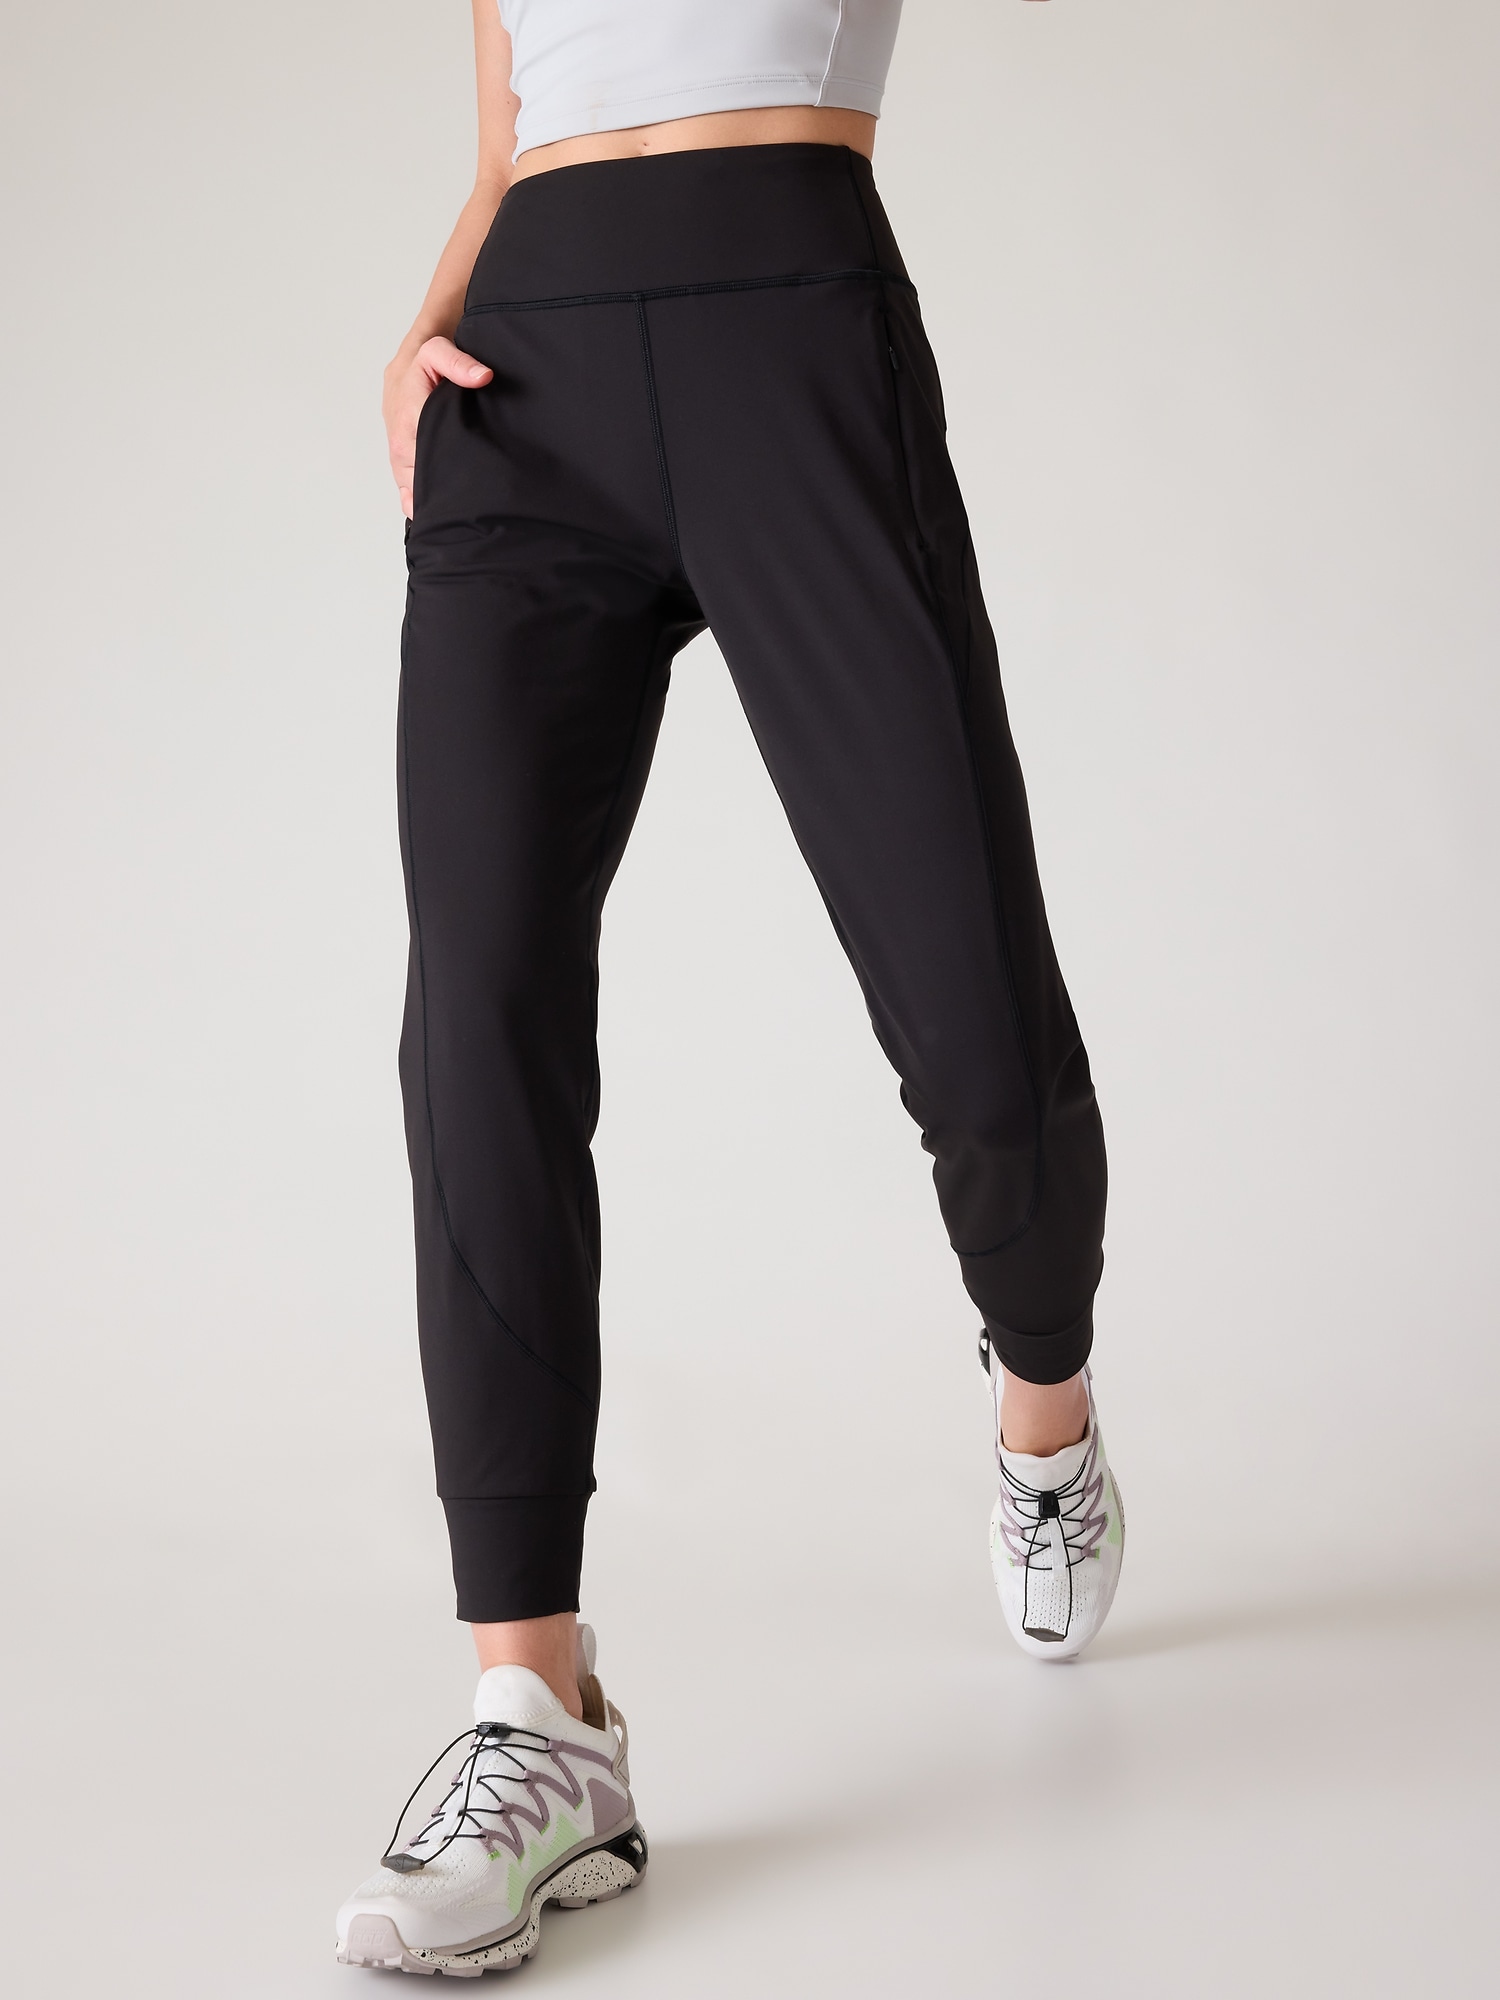 Athleta Lined Athletic Pants for Women